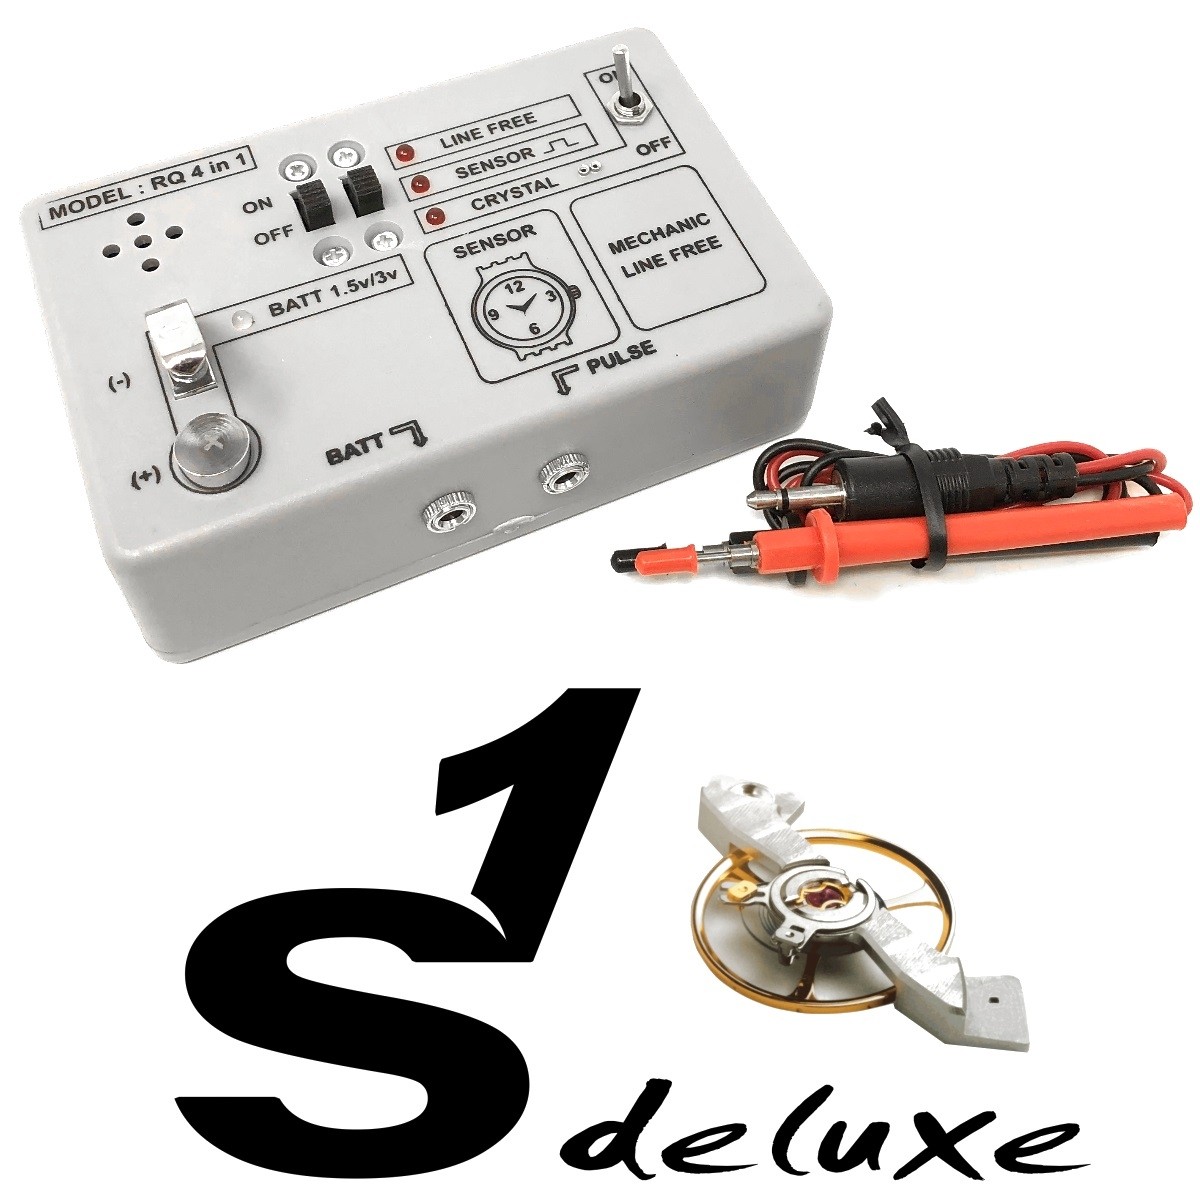 S1 Deluxe 4in1 quartz watch tester and battery checker device for